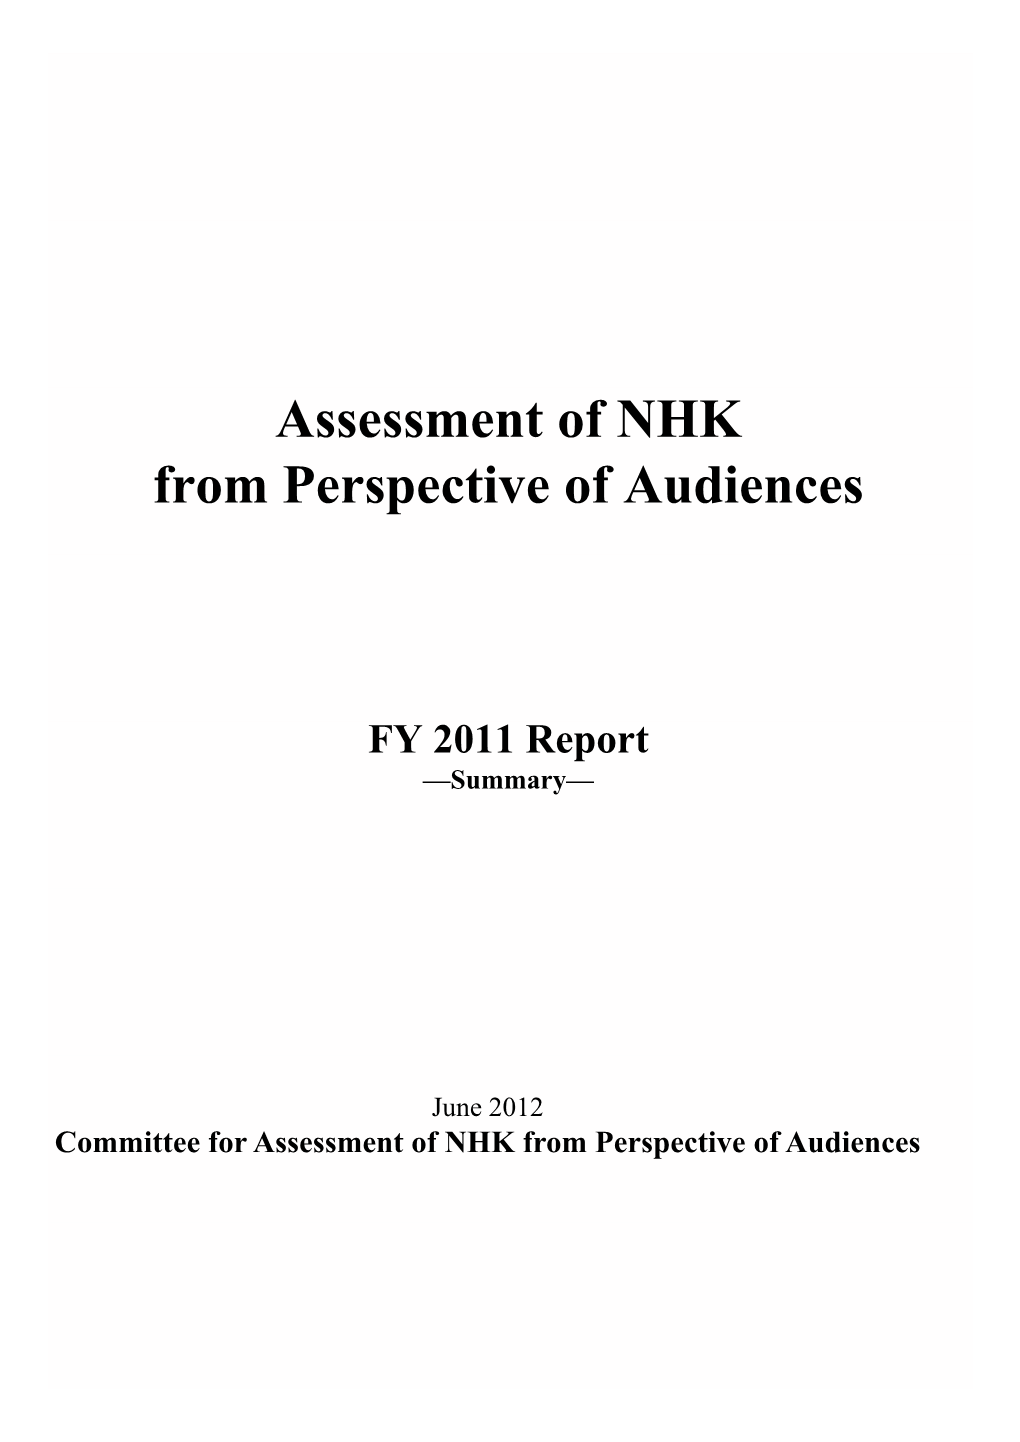 Assessment of NHK from Perspective of Audiences